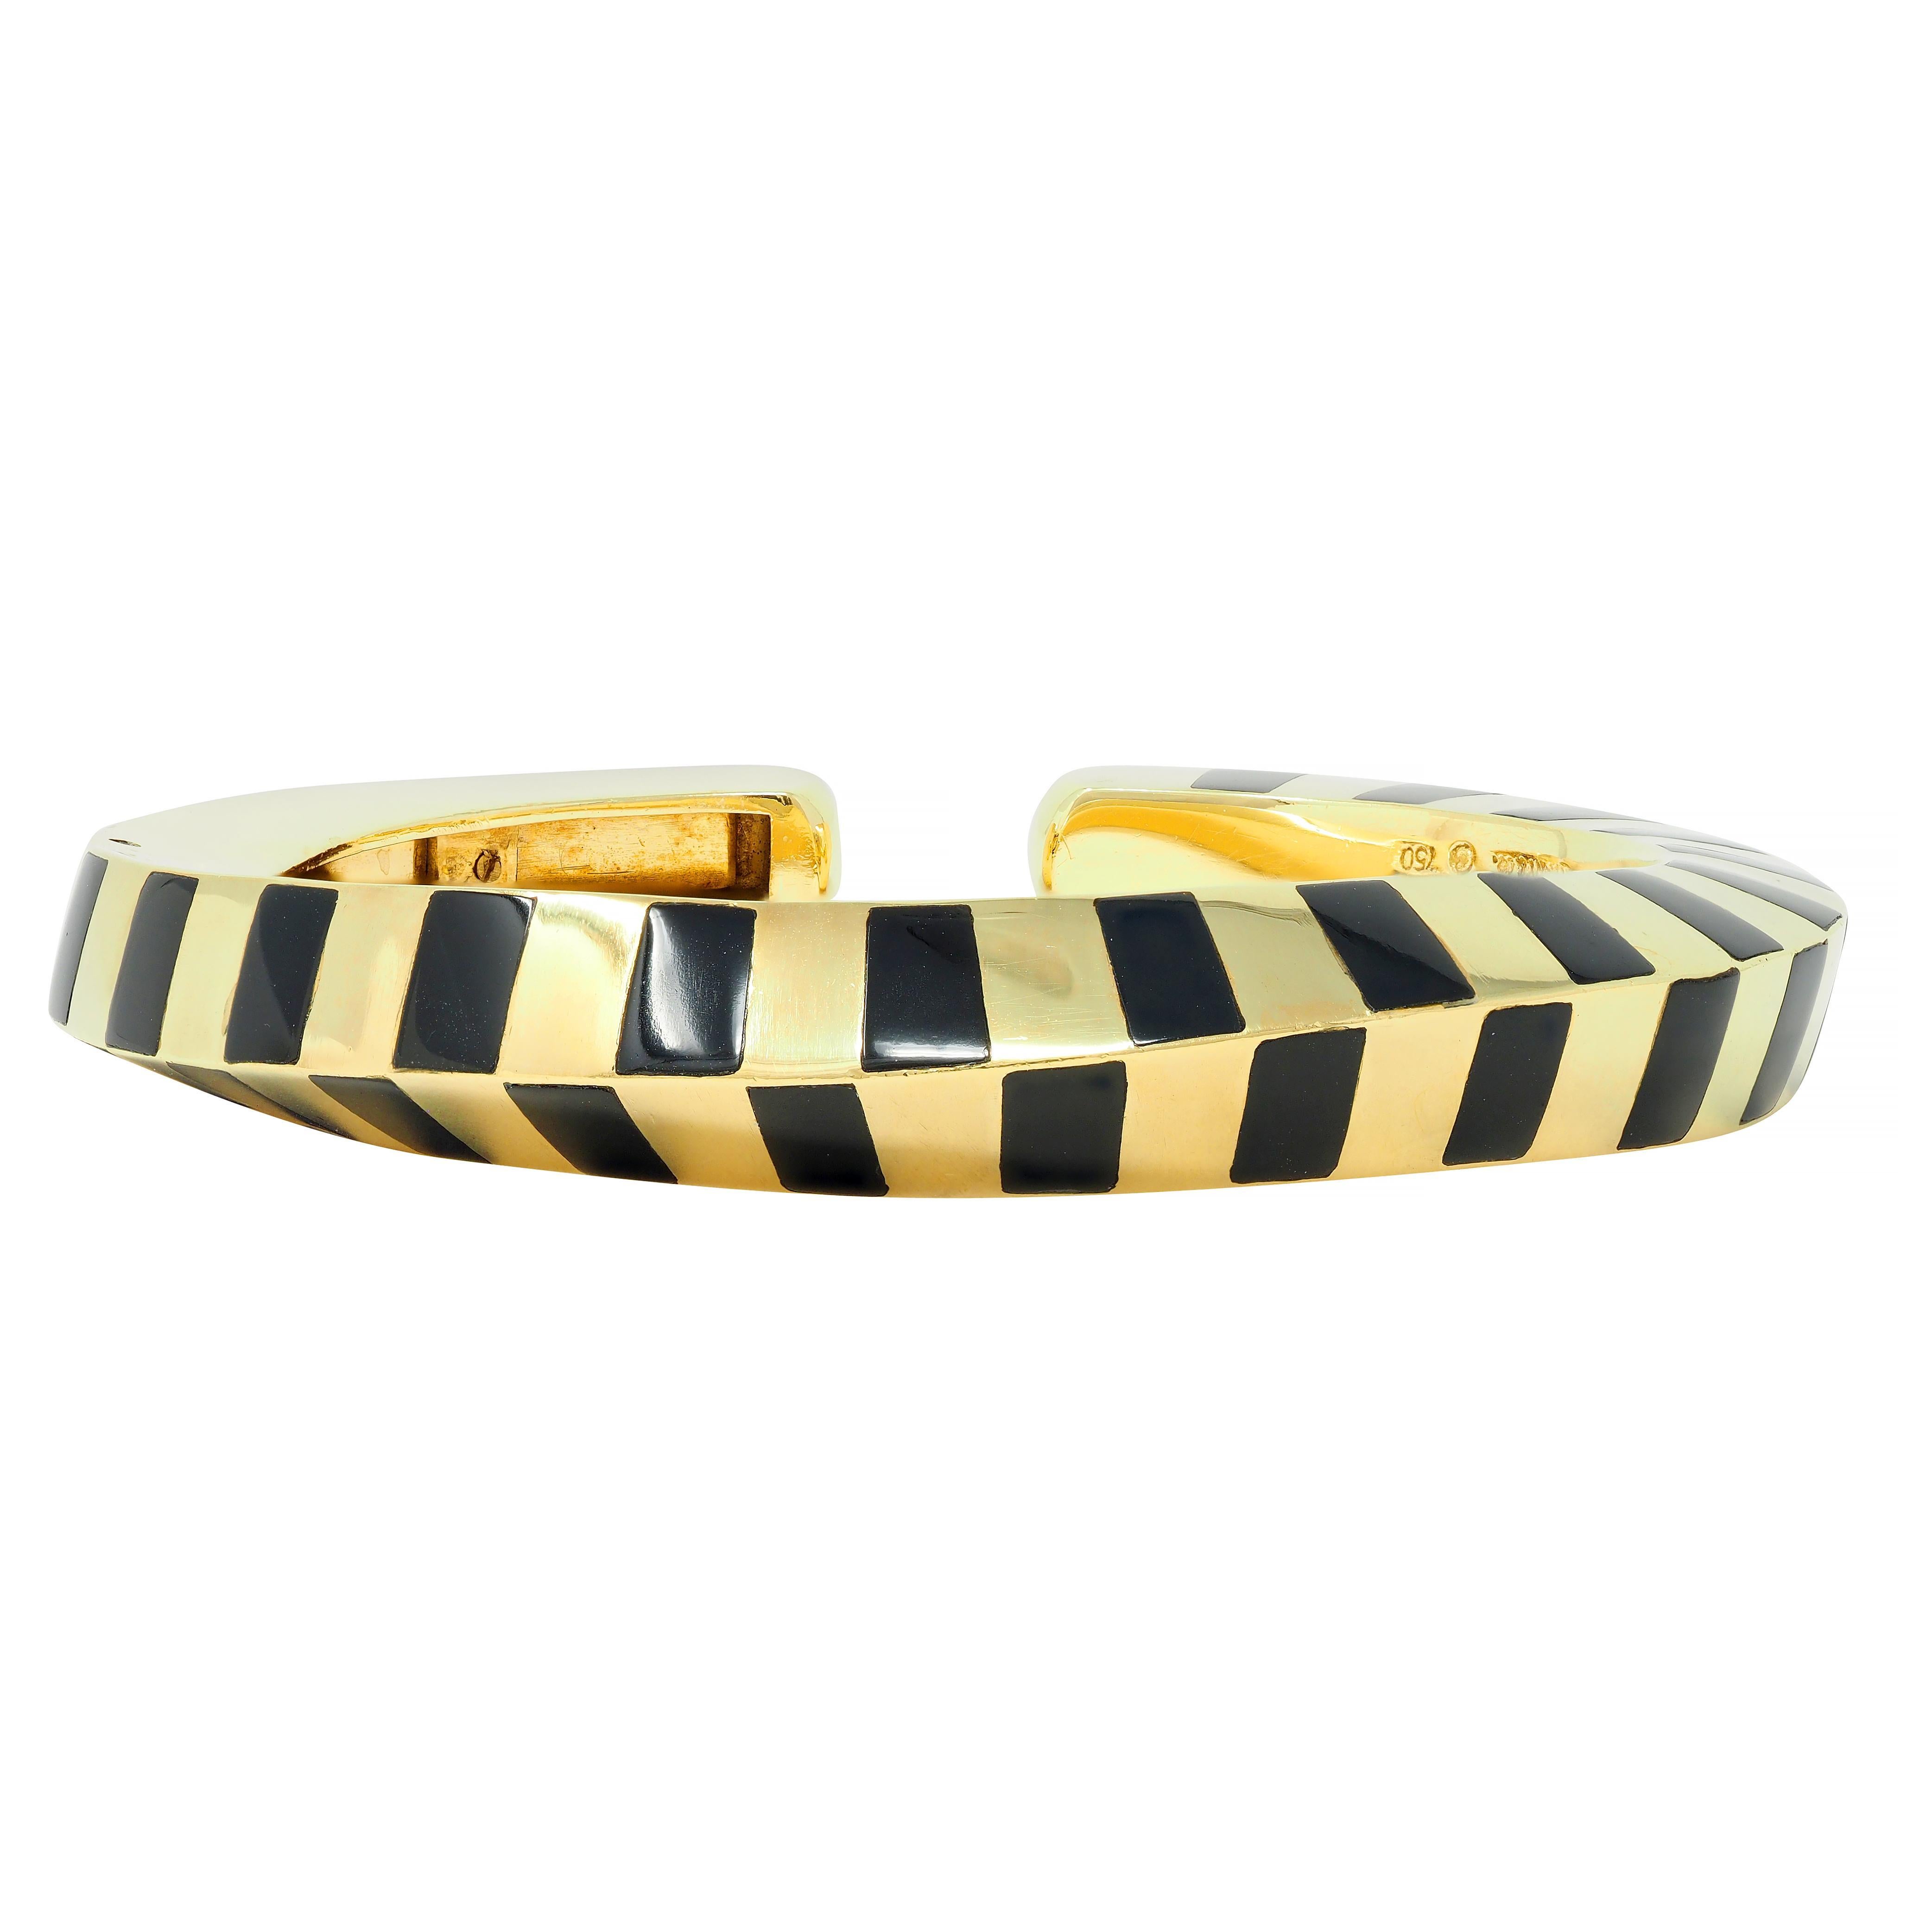 Designed as a faceted and slightly twisted gold cuff 
Accented by an inlaid onyx plaque stripe motif
Opaque glossy black in color 
Terminals are rounded - one is hinged for easy wear
Stamped for 18 karat gold
Fully signed for Tiffany & Co.
Circa: